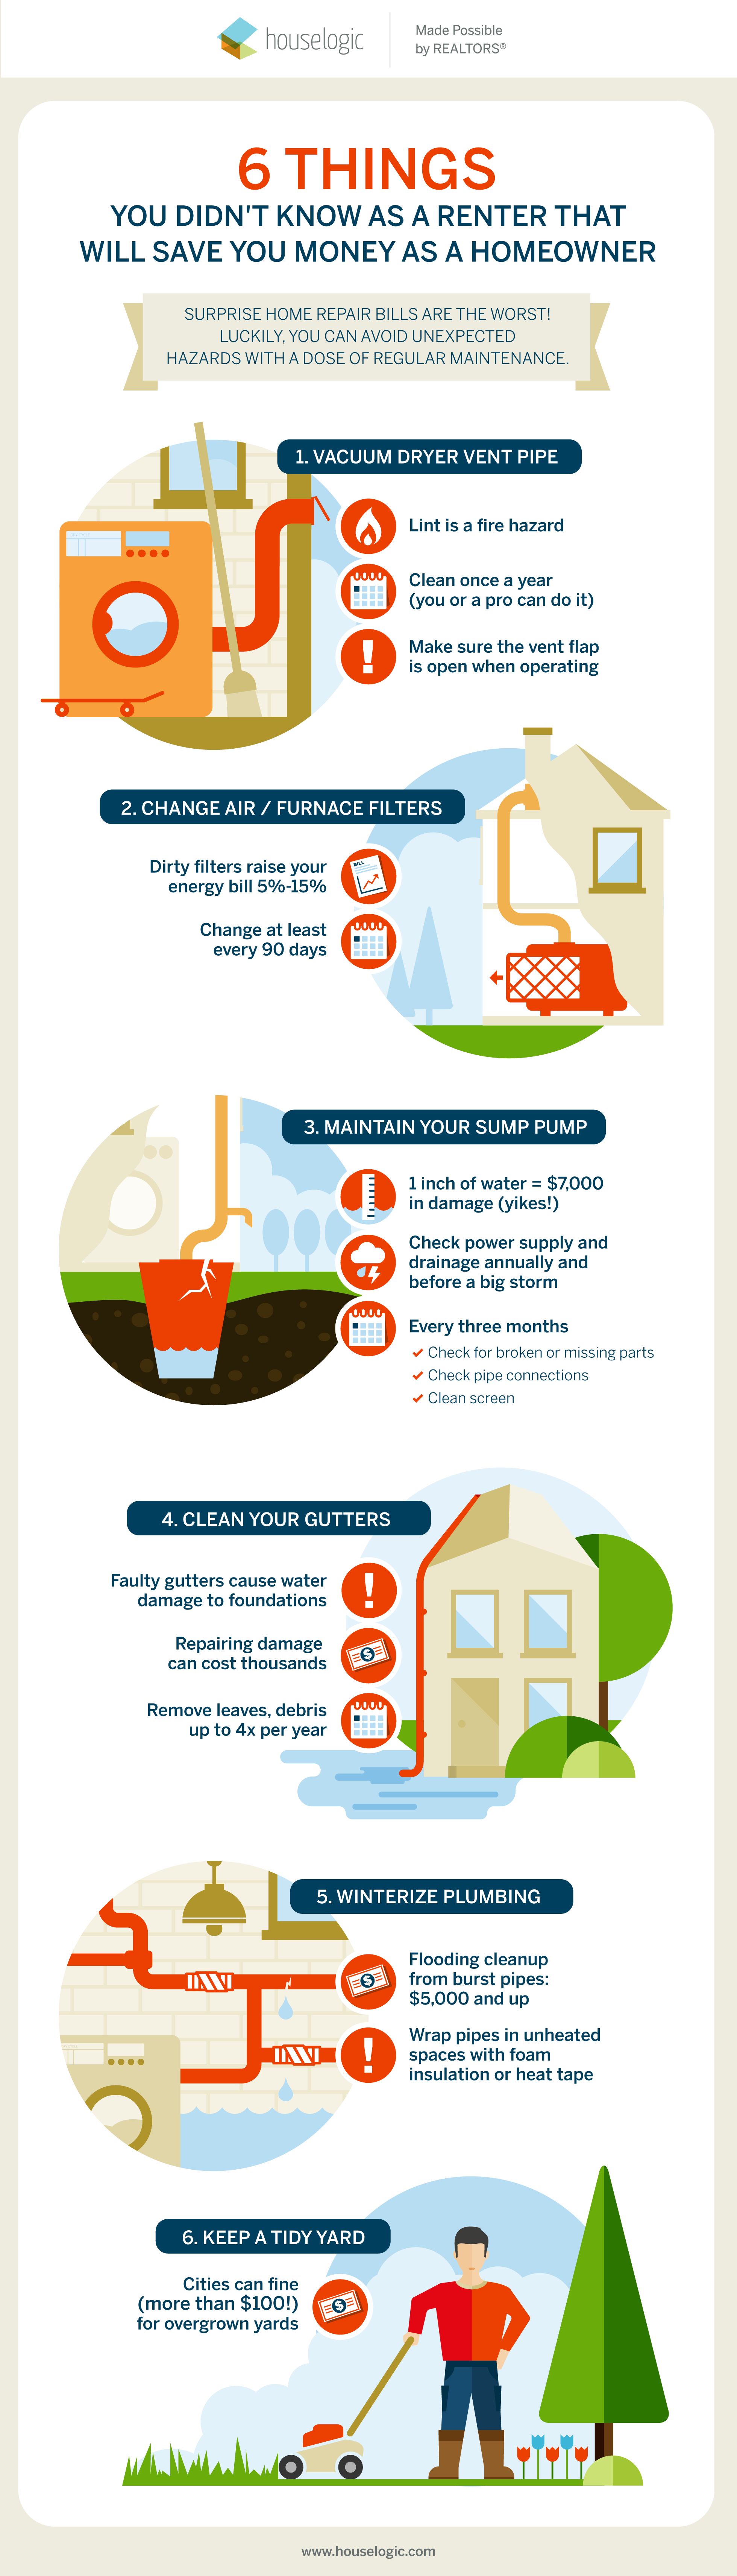 Tips for New Homeowners Infographic